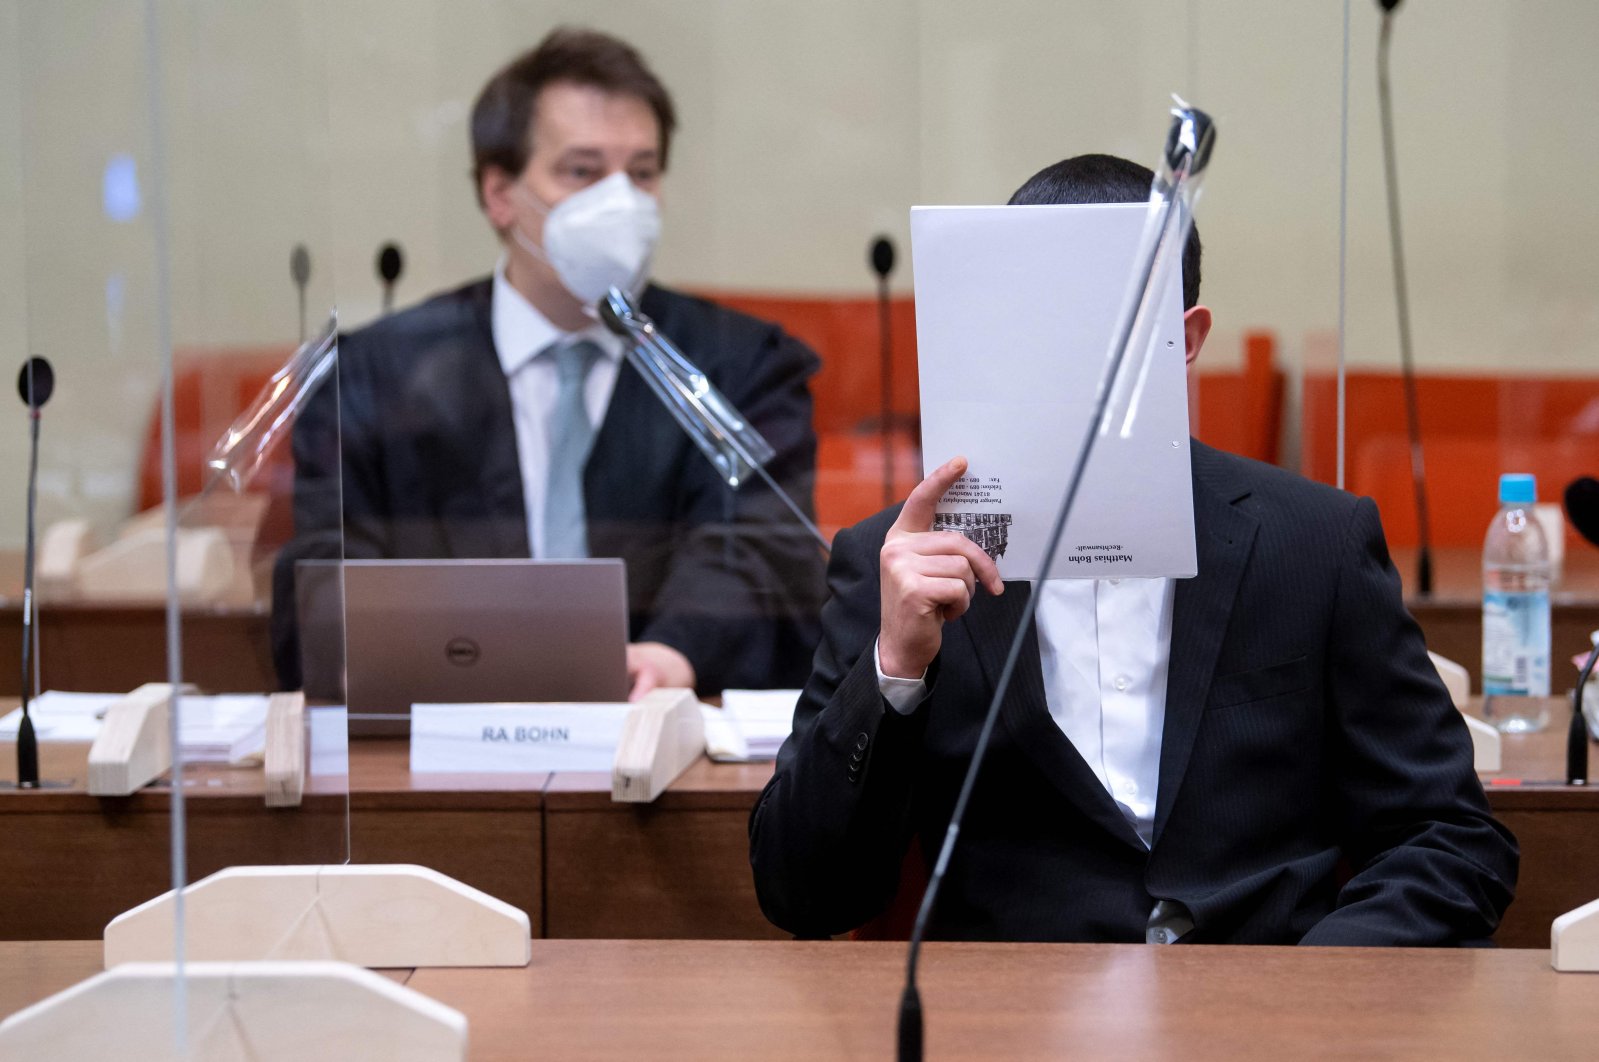 The defendant (R), an alleged member of the terrorist group Daesh, sits next to his lawyer Matthias Bohn as he waits for the opening of his trial in Munich, southern Germany, March 2, 2021. (AFP Photo)